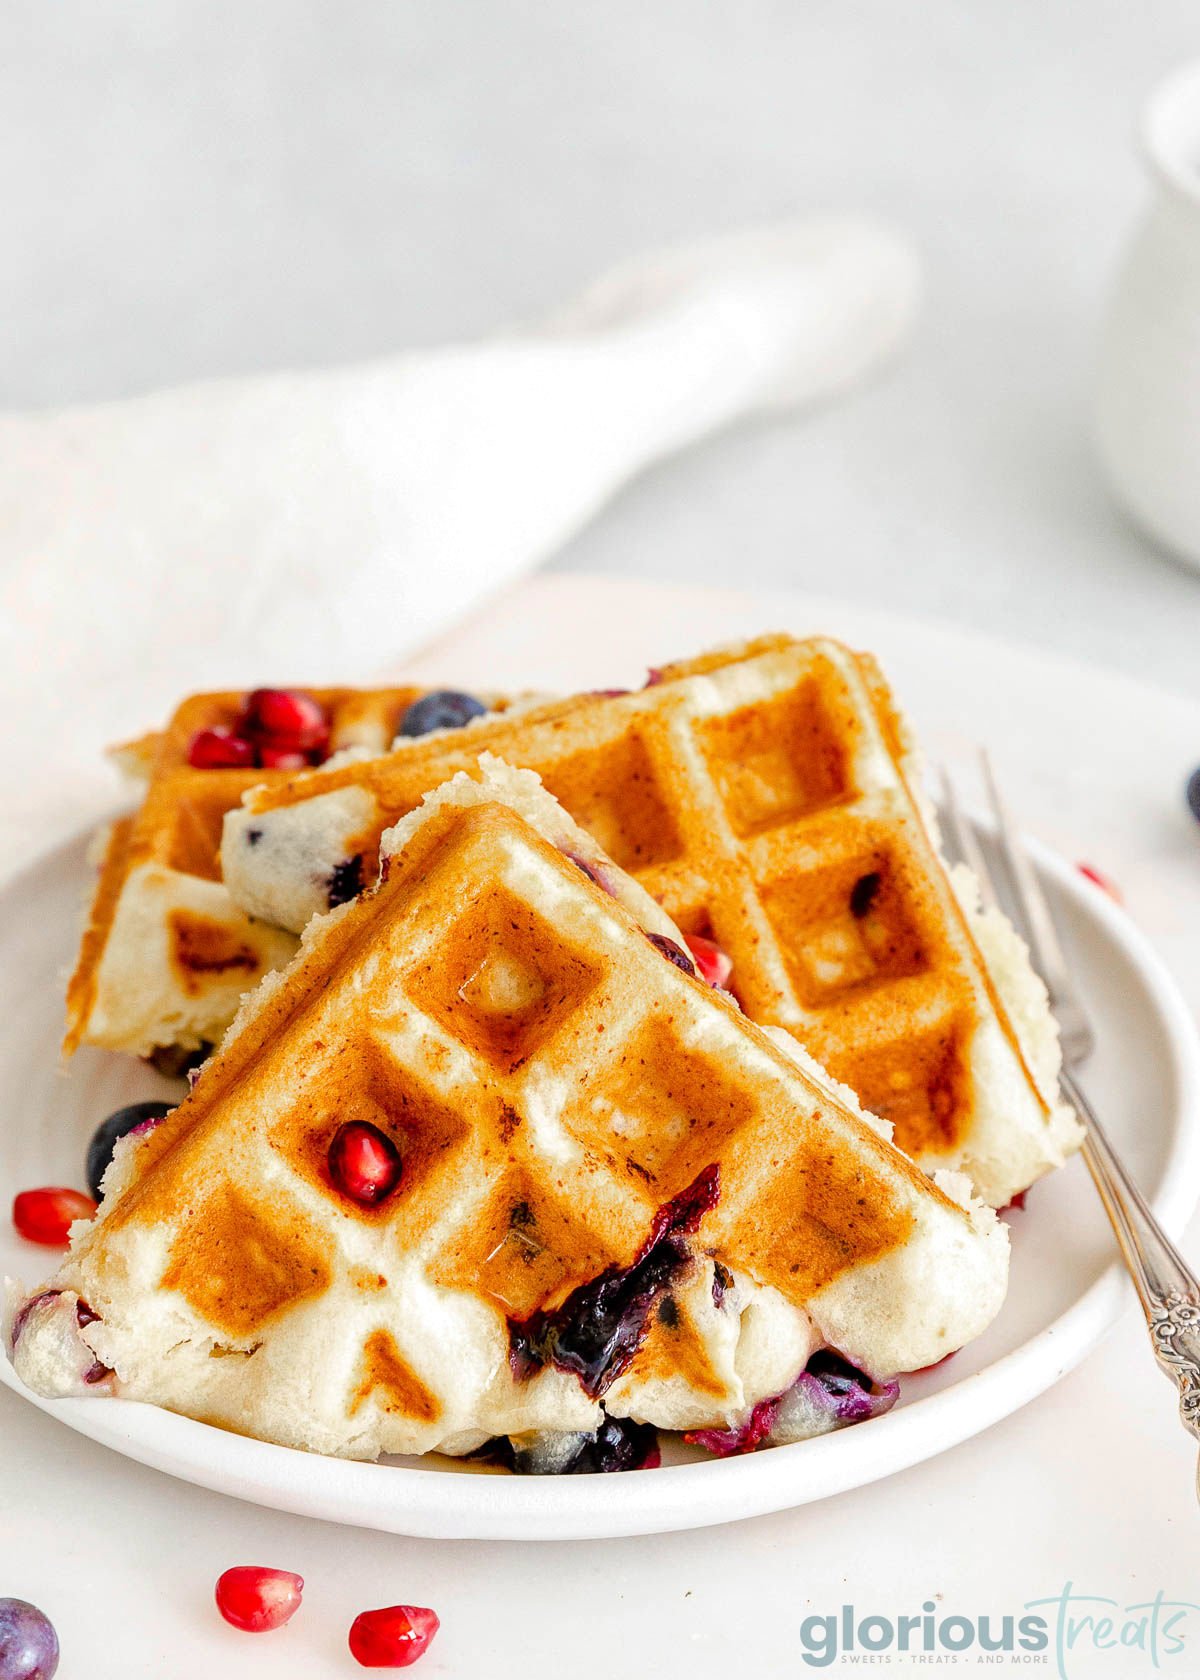 white round plate topped with three waffles made with ricotta cheese and blueberries.